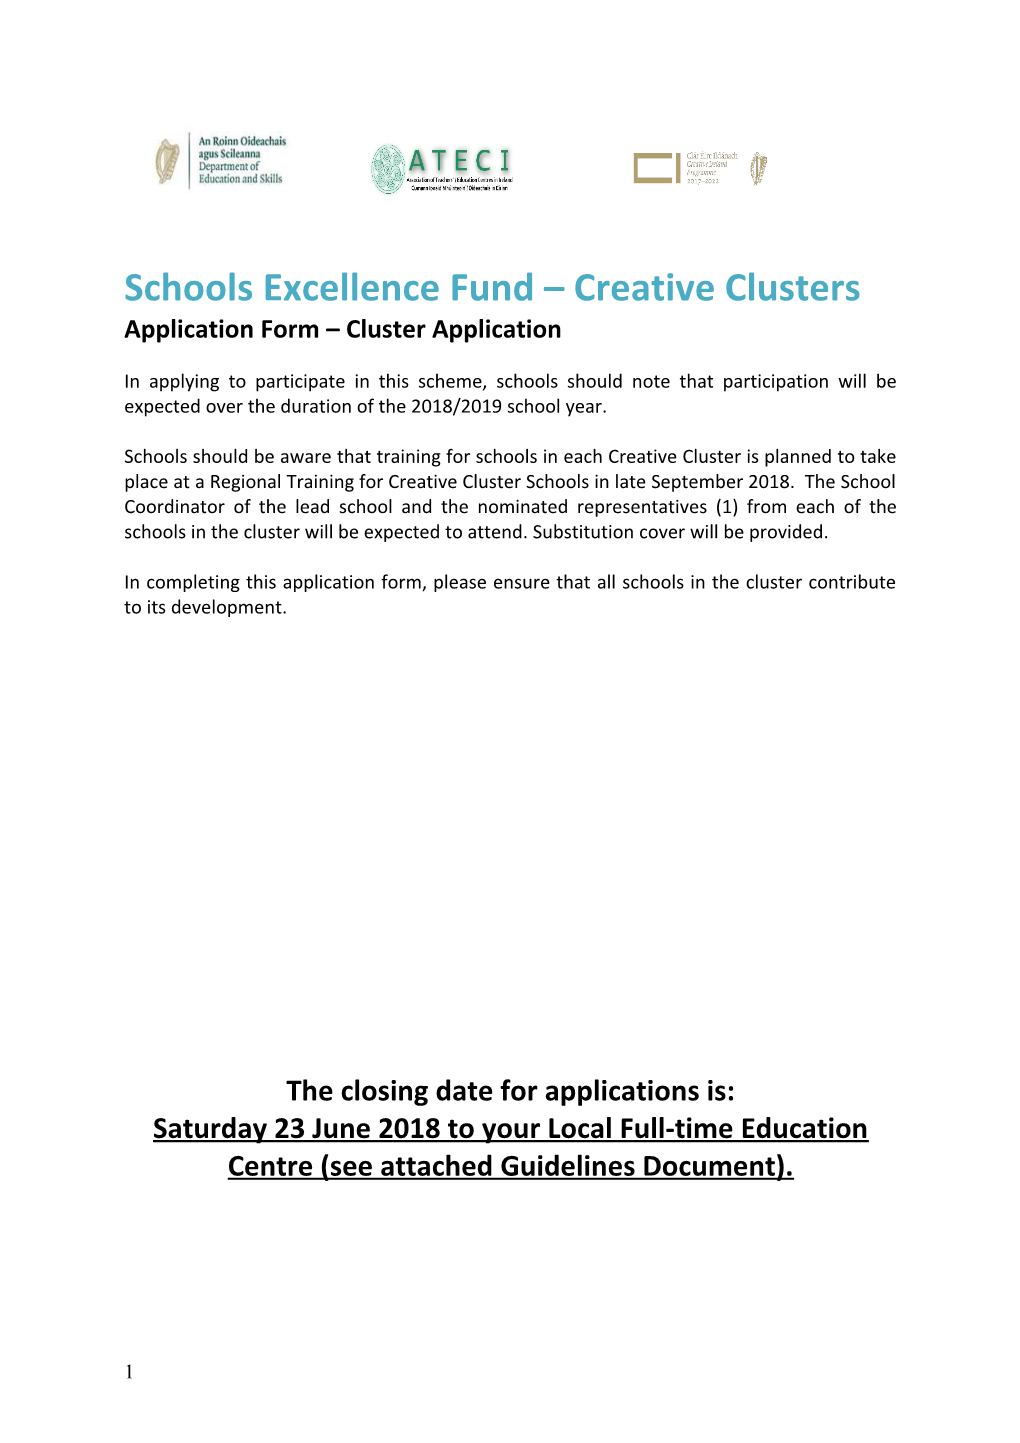 Schools Excellence Fund Creative Clusters